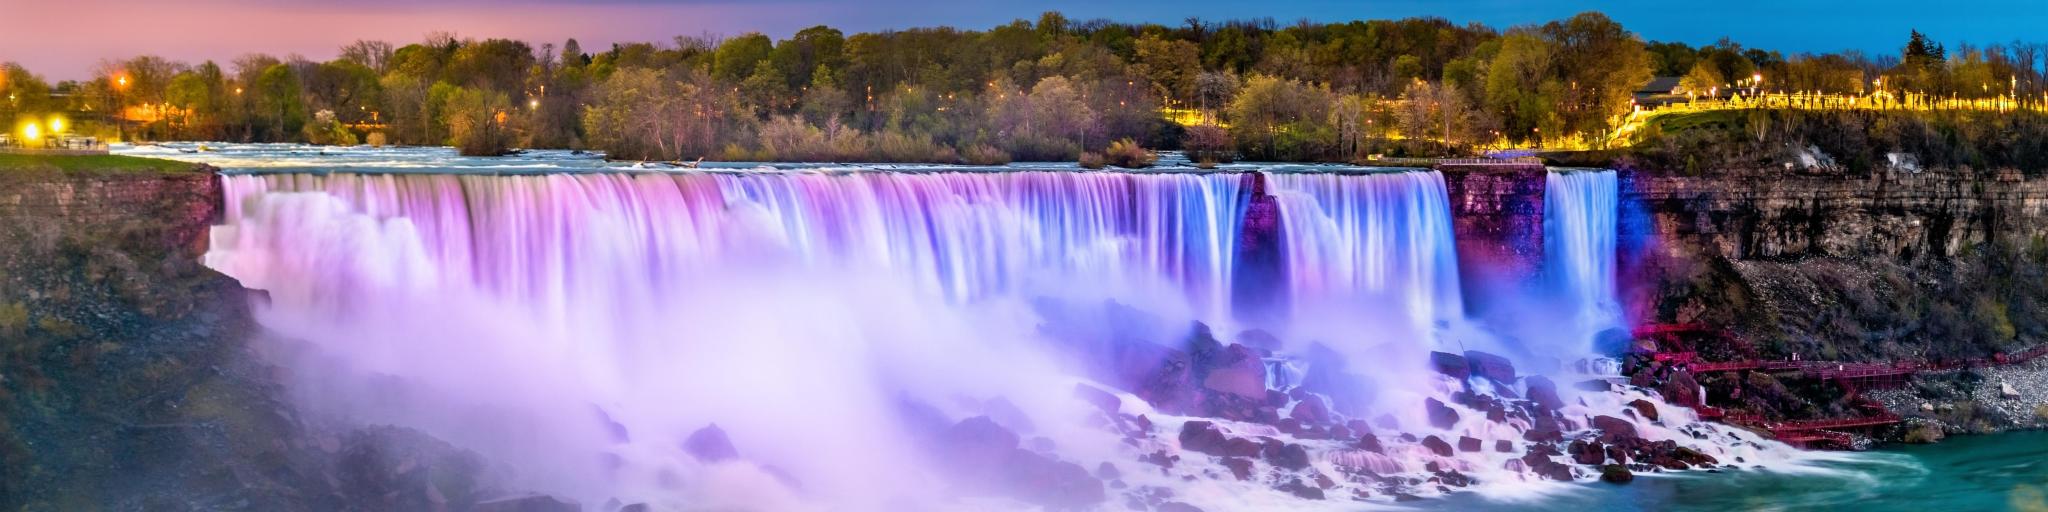 Niagara Falls, Canada with the American Falls and the Bridal Veil Falls in the foreground taken from the Canadian side at night with the waterfall reflected in colors of pinks, blues and purples. 